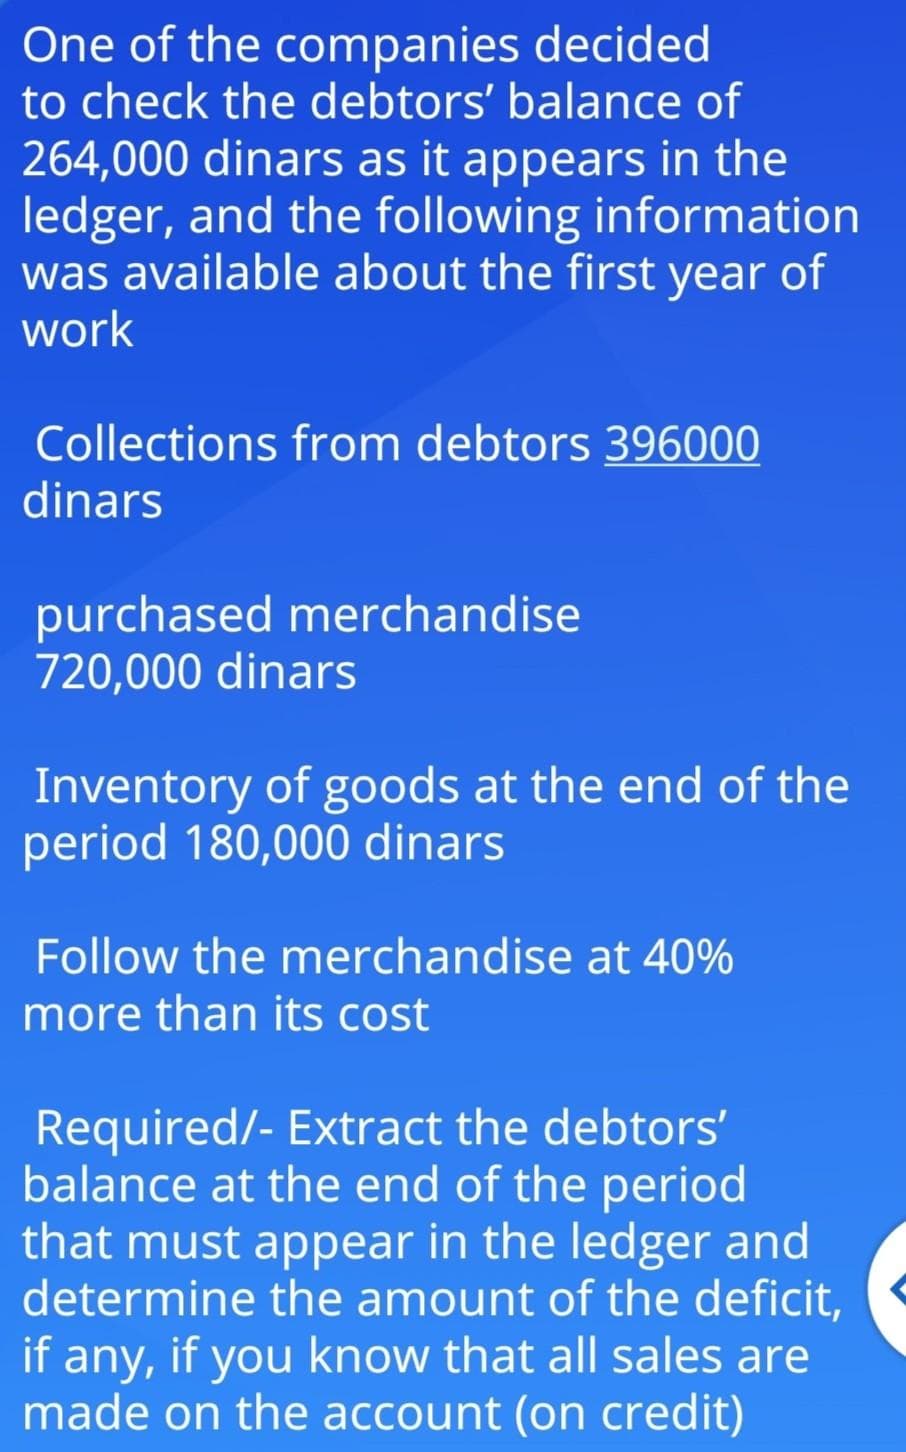 One of the companies decided
to check the debtors' balance of
264,000 dinars as it appears in the
ledger, and the following information
was available about the first year of
work
Collections from debtors 396000
dinars
purchased merchandise
720,000 dinars
Inventory of goods at the end of the
period 180,000 dinars
Follow the merchandise at 40%
more than its cost
Required/- Extract the debtors'
balance at the end of the period
that must appear in the ledger and
determine the amount of the deficit,
if any, if you know that all sales are
made on the account (on credit)
